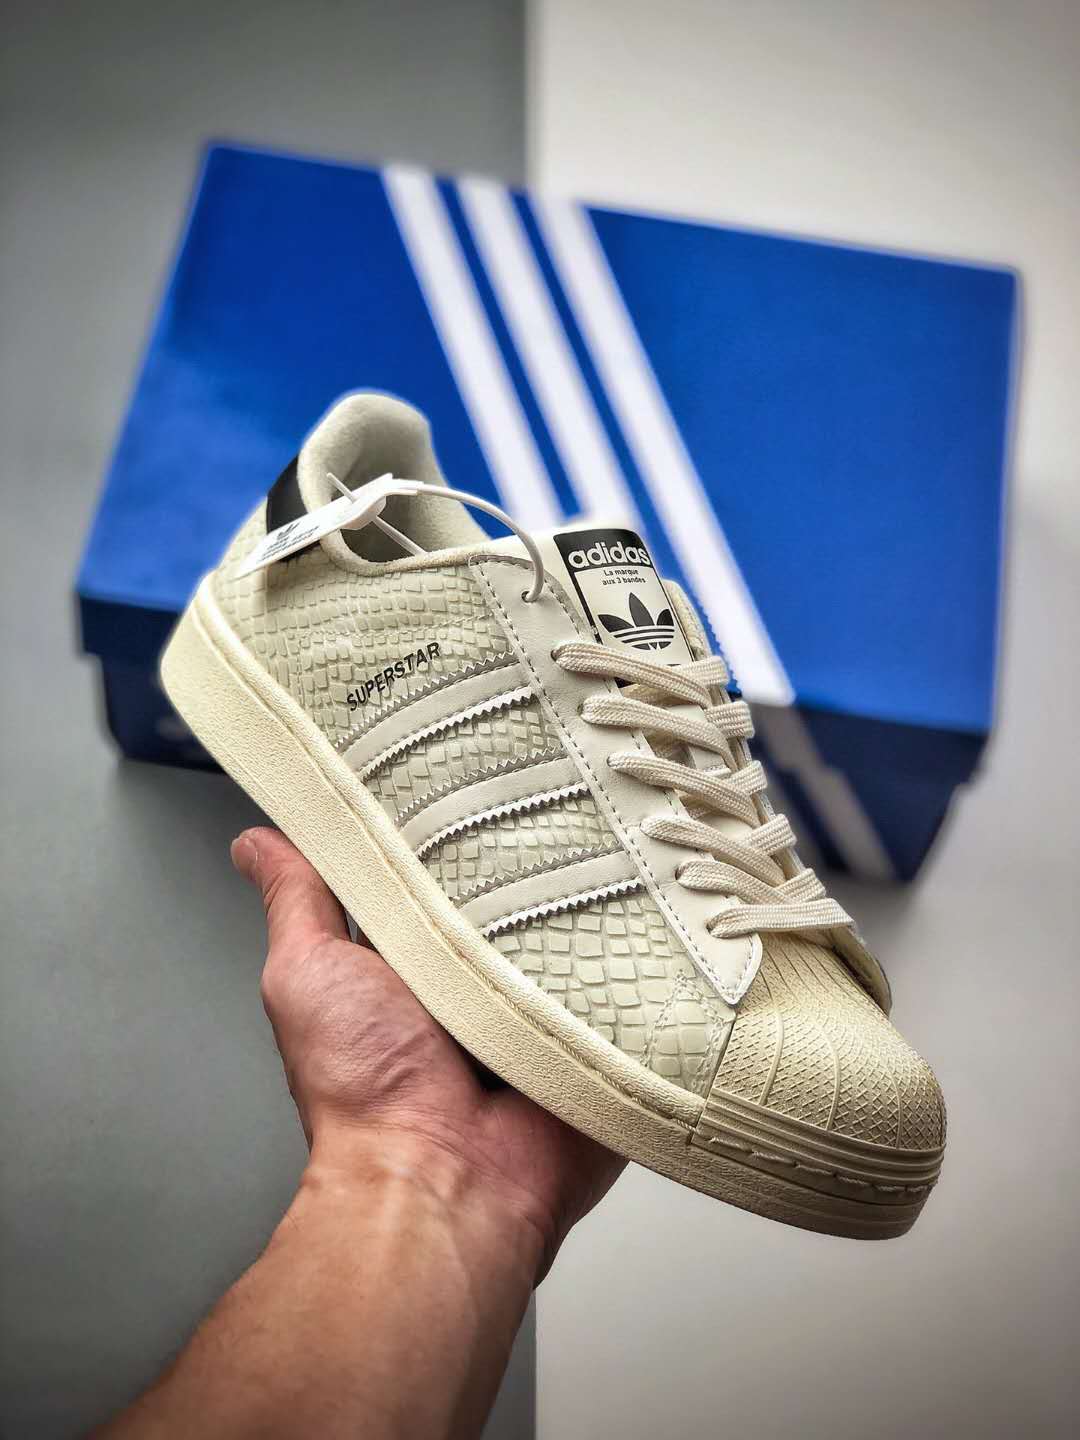 Adidas atmos x Superstar 'G-SNK' FY5253 - Limited Edition Urban Sneakers